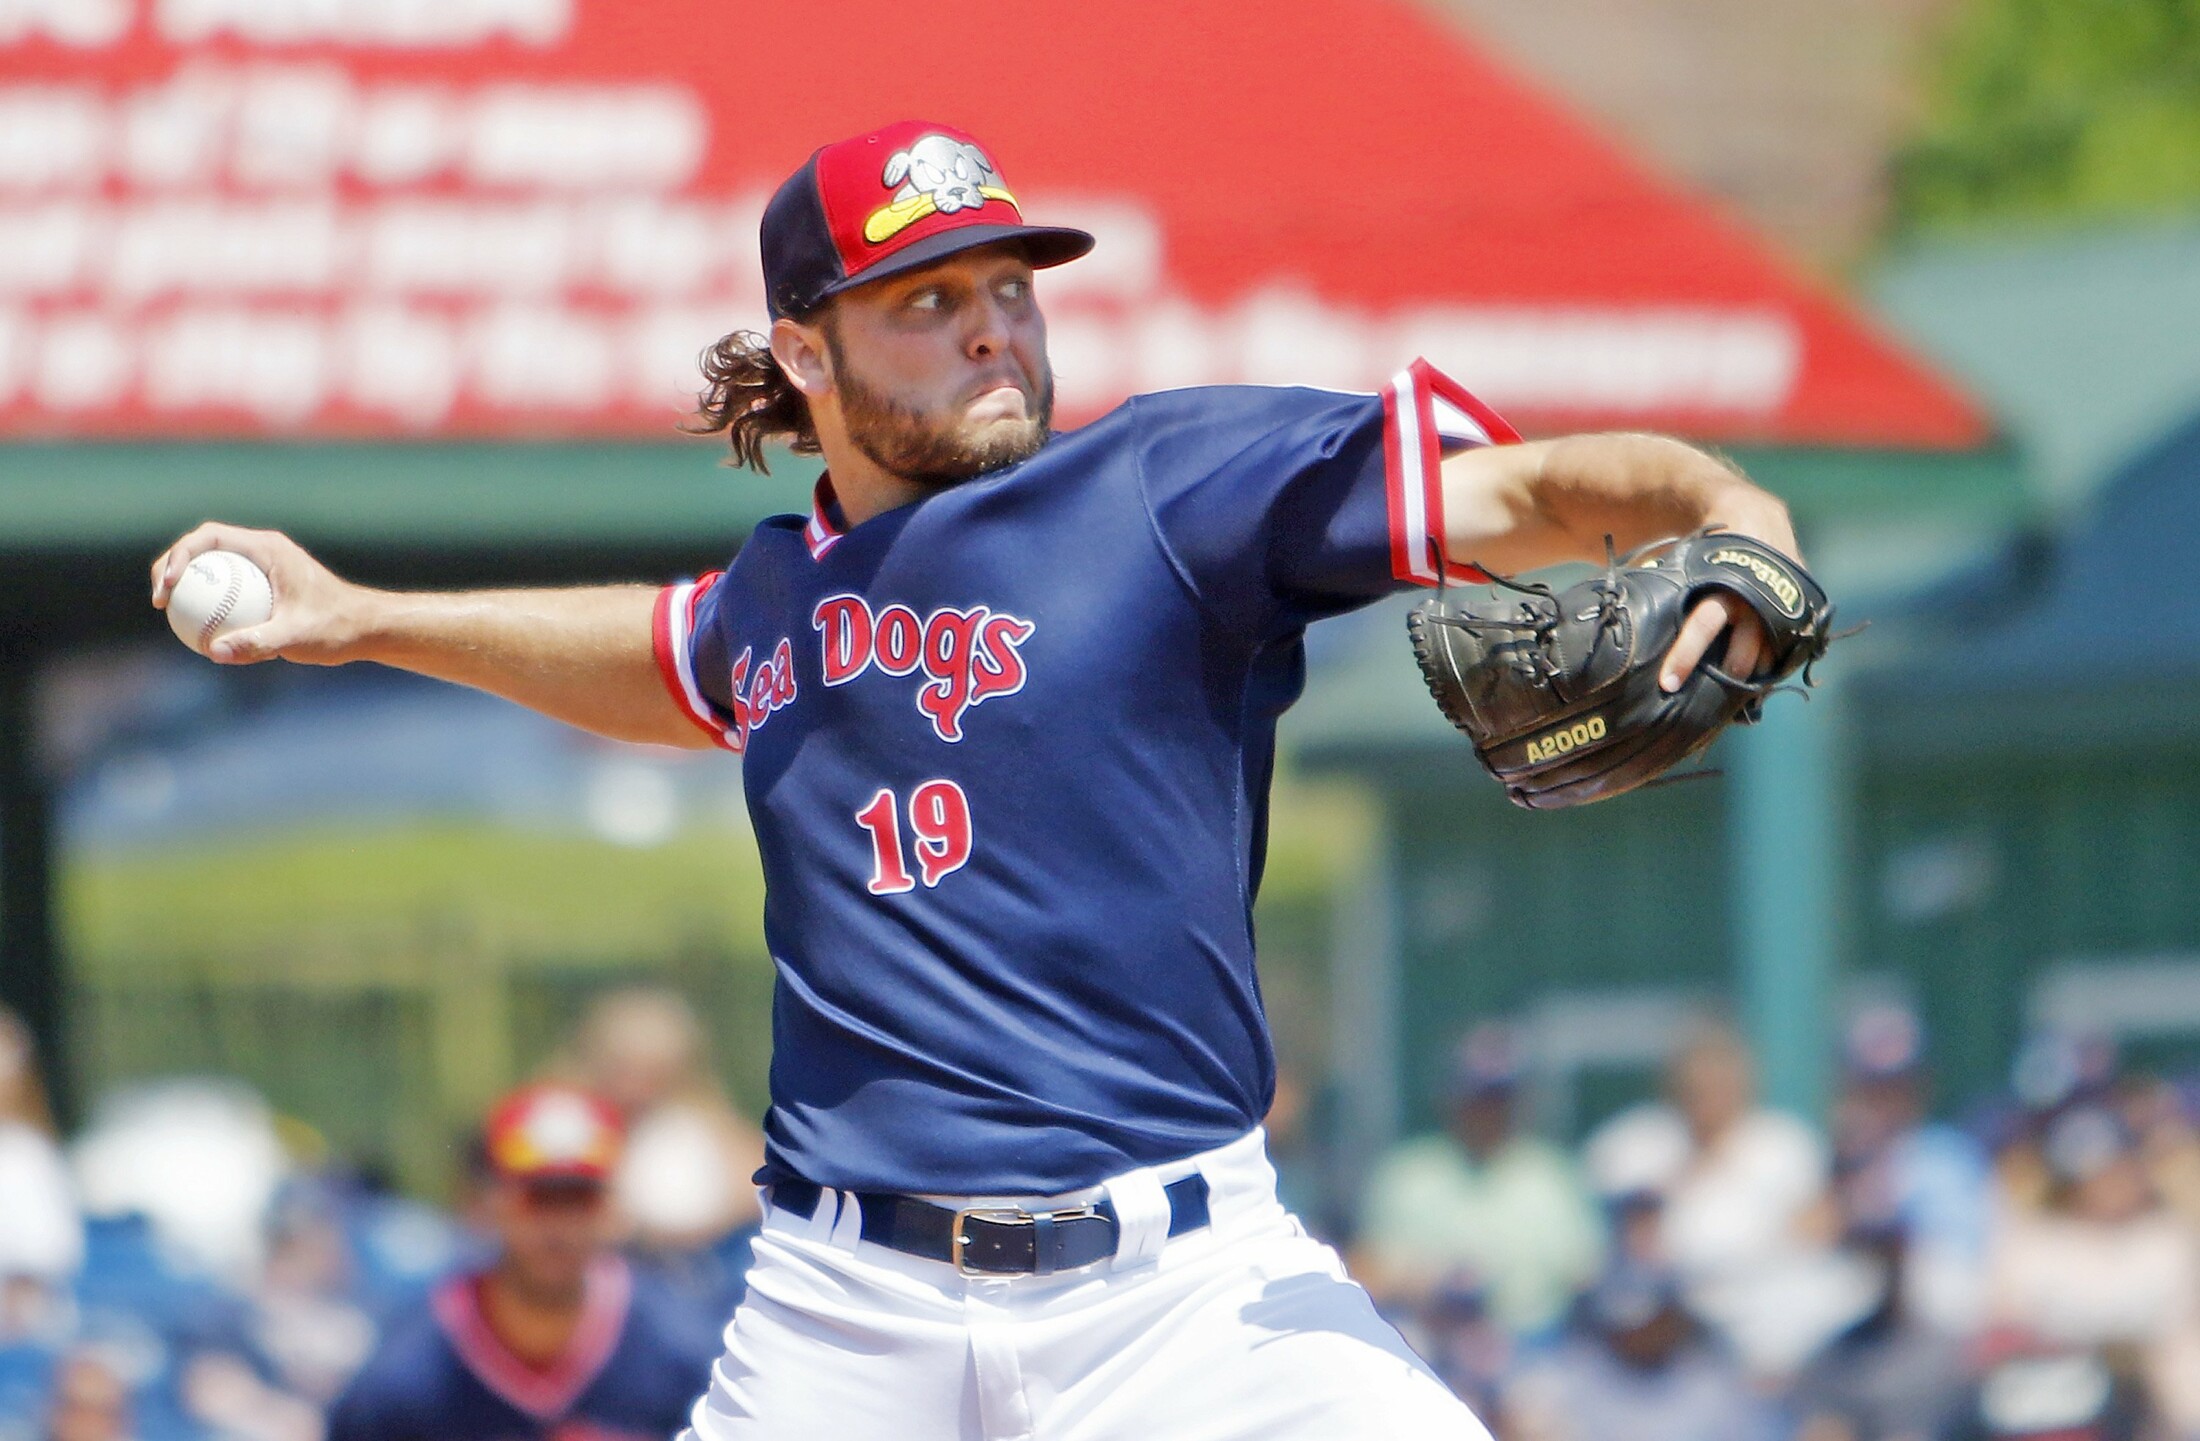 Farm report: Crawford's cutter gets him promoted to Sea Dogs